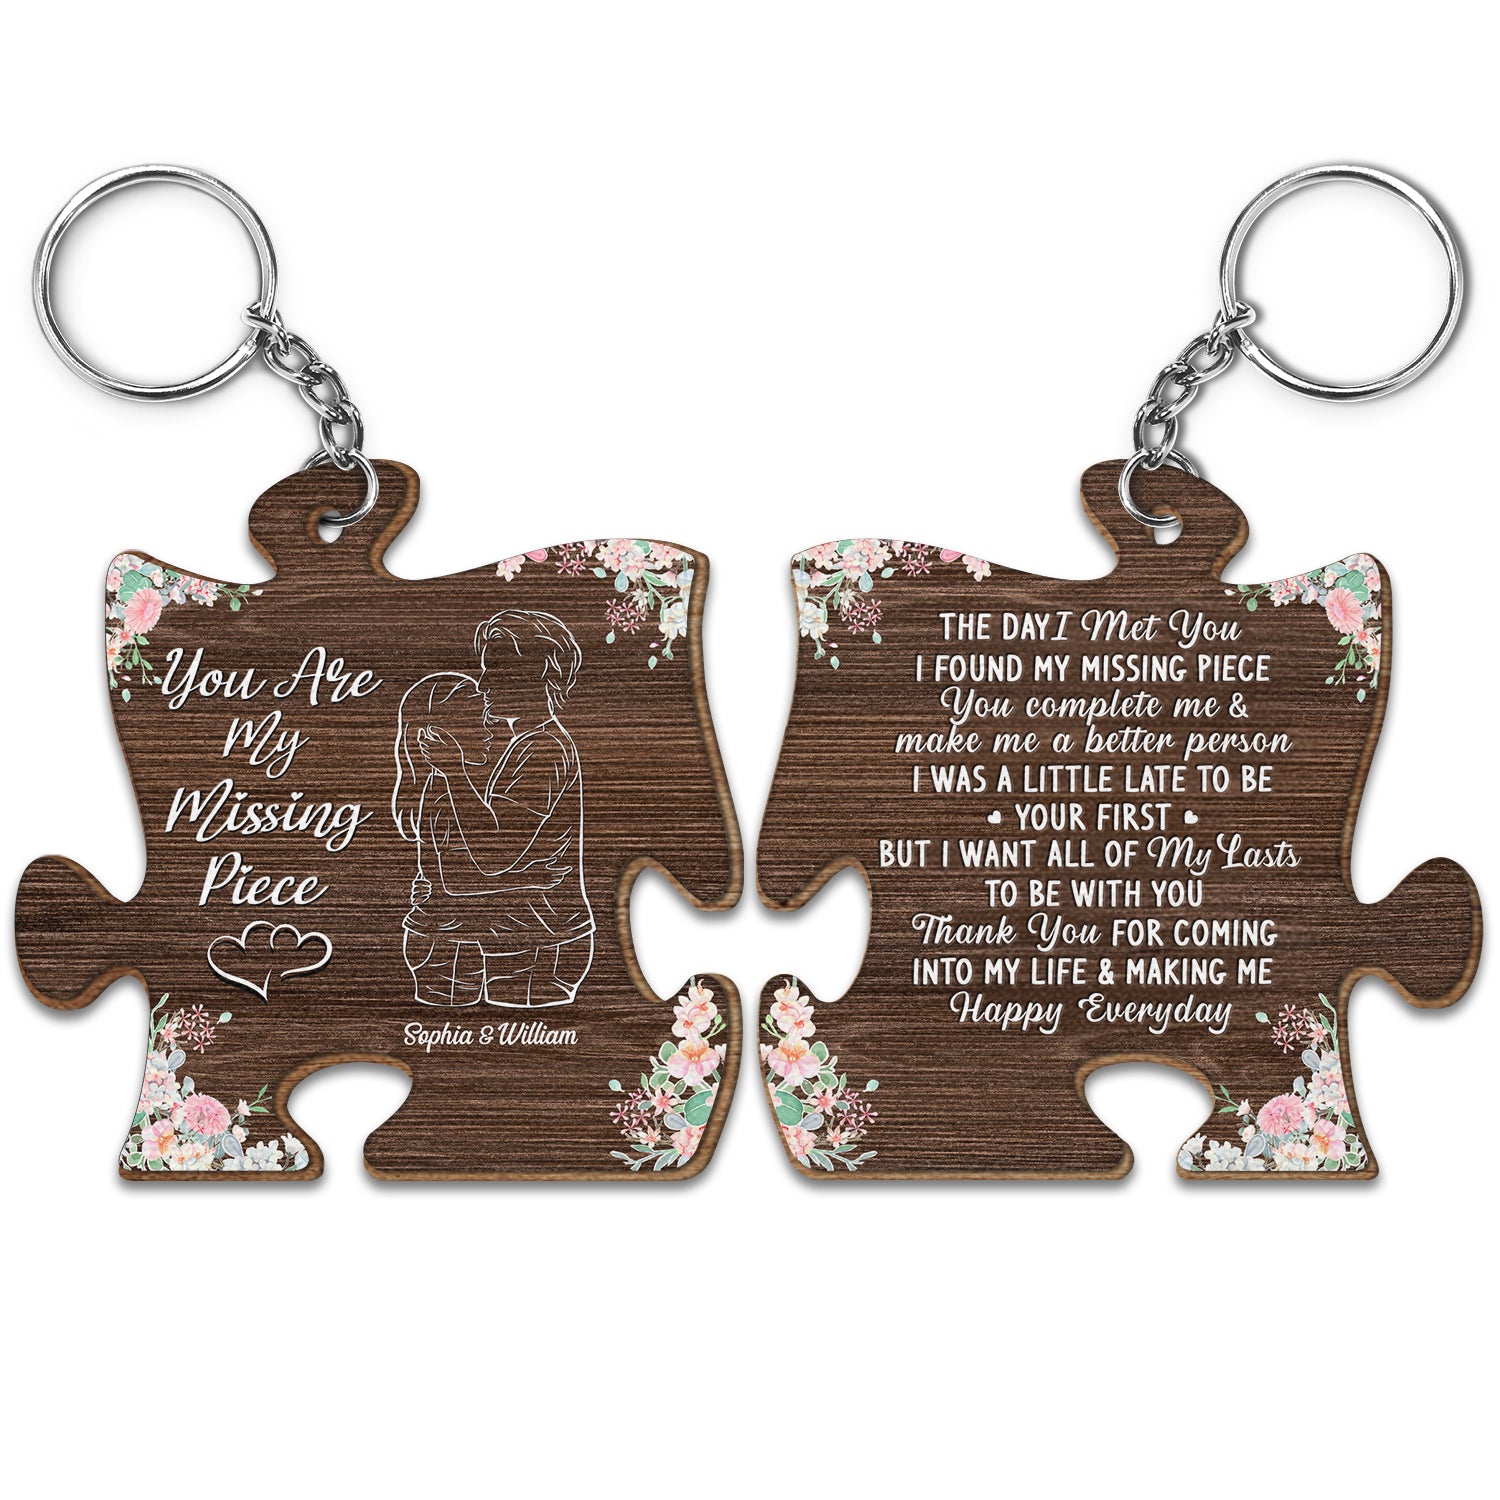 You Are My Missing Piece - Anniversary Gift For Couples - Personalized Wooden Keychain